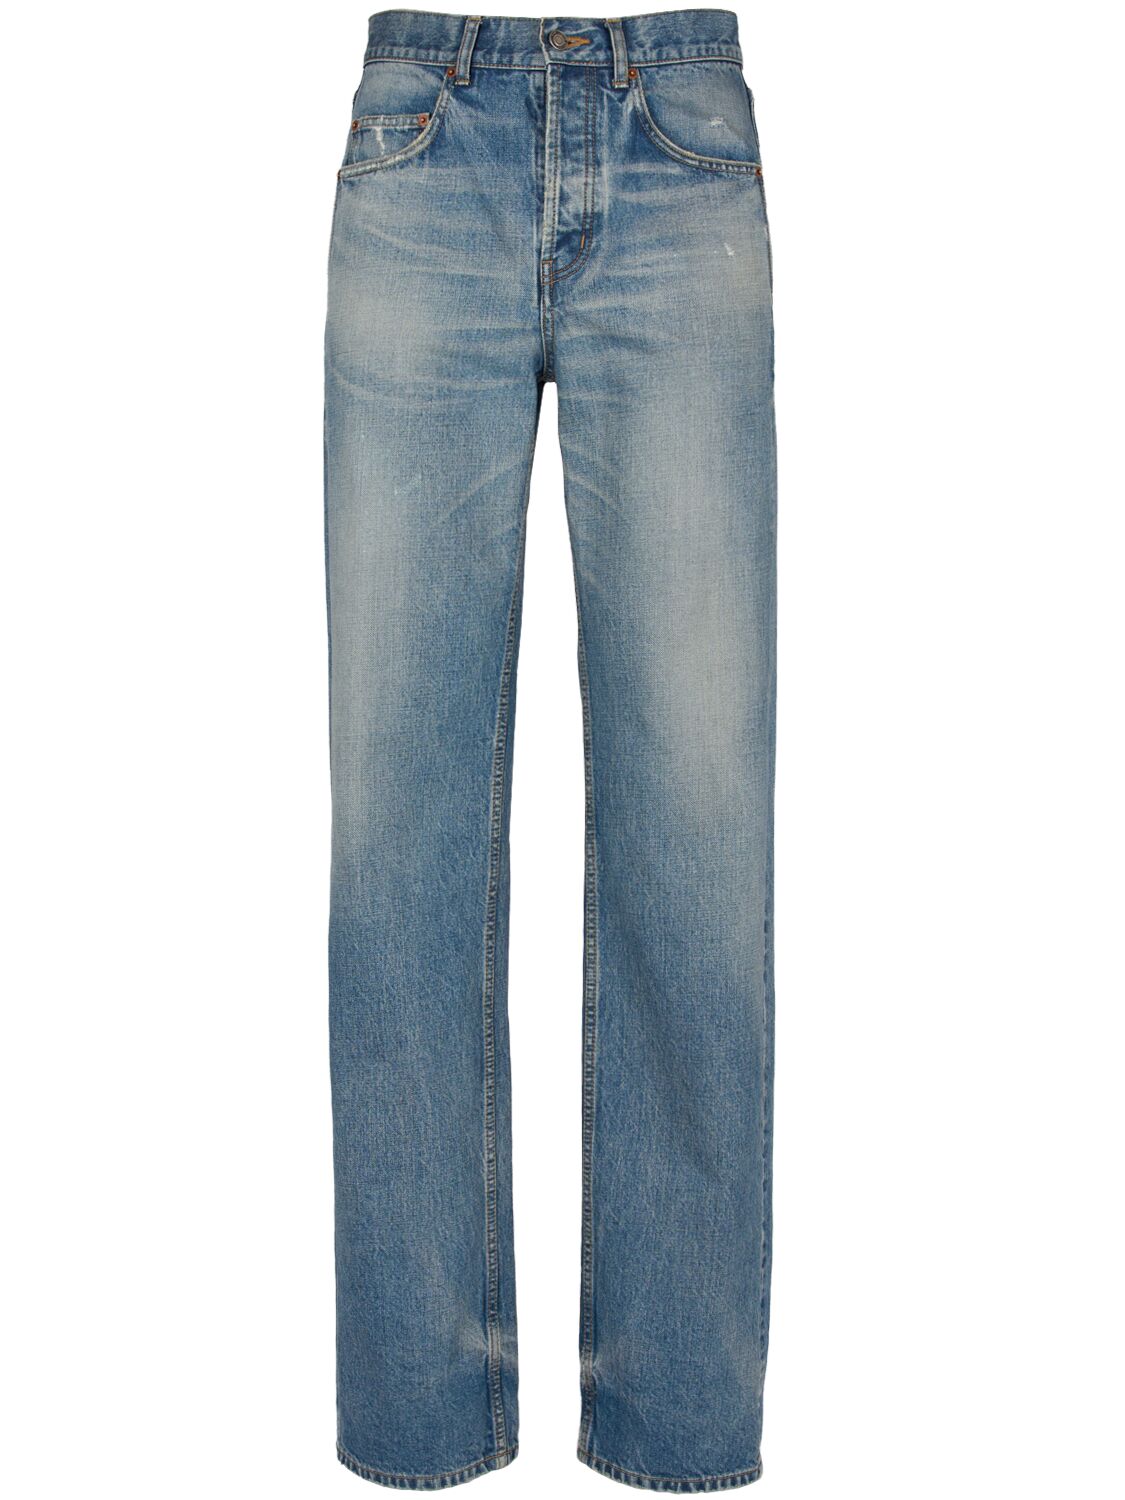 Image of Adjusted Maxi Cotton Denim Long Jeans